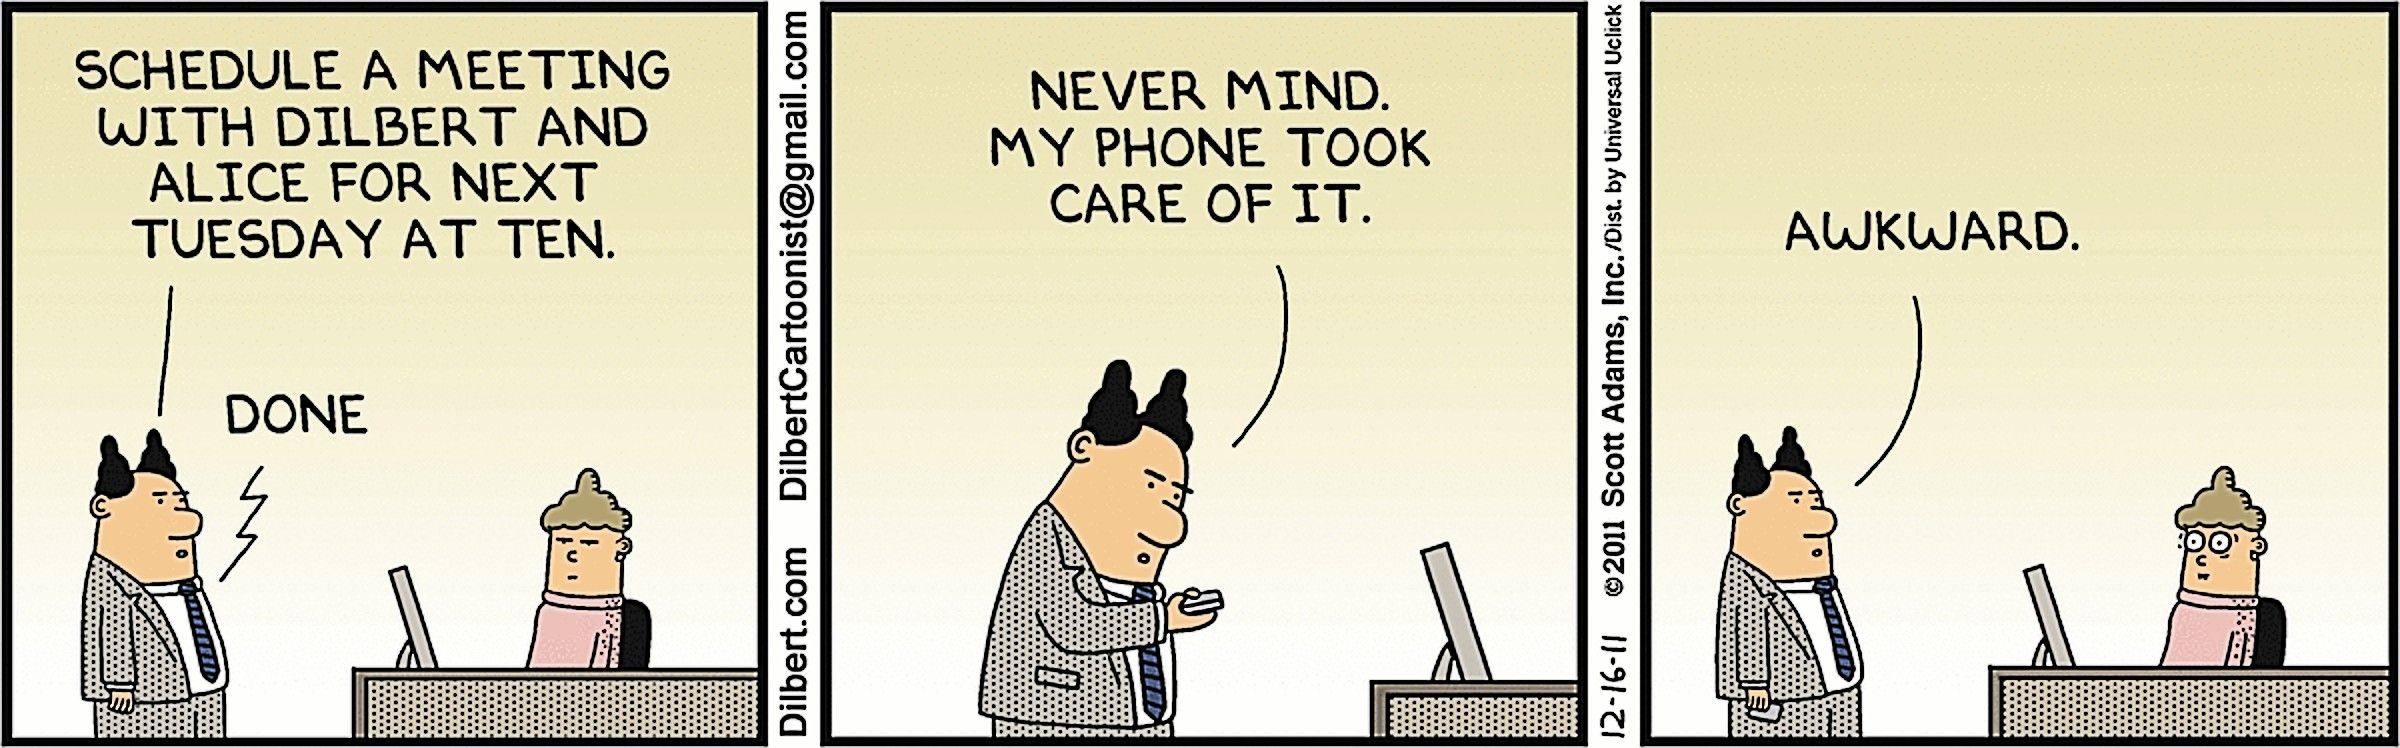 Dilbert, "Nevermind my phone took care of it"